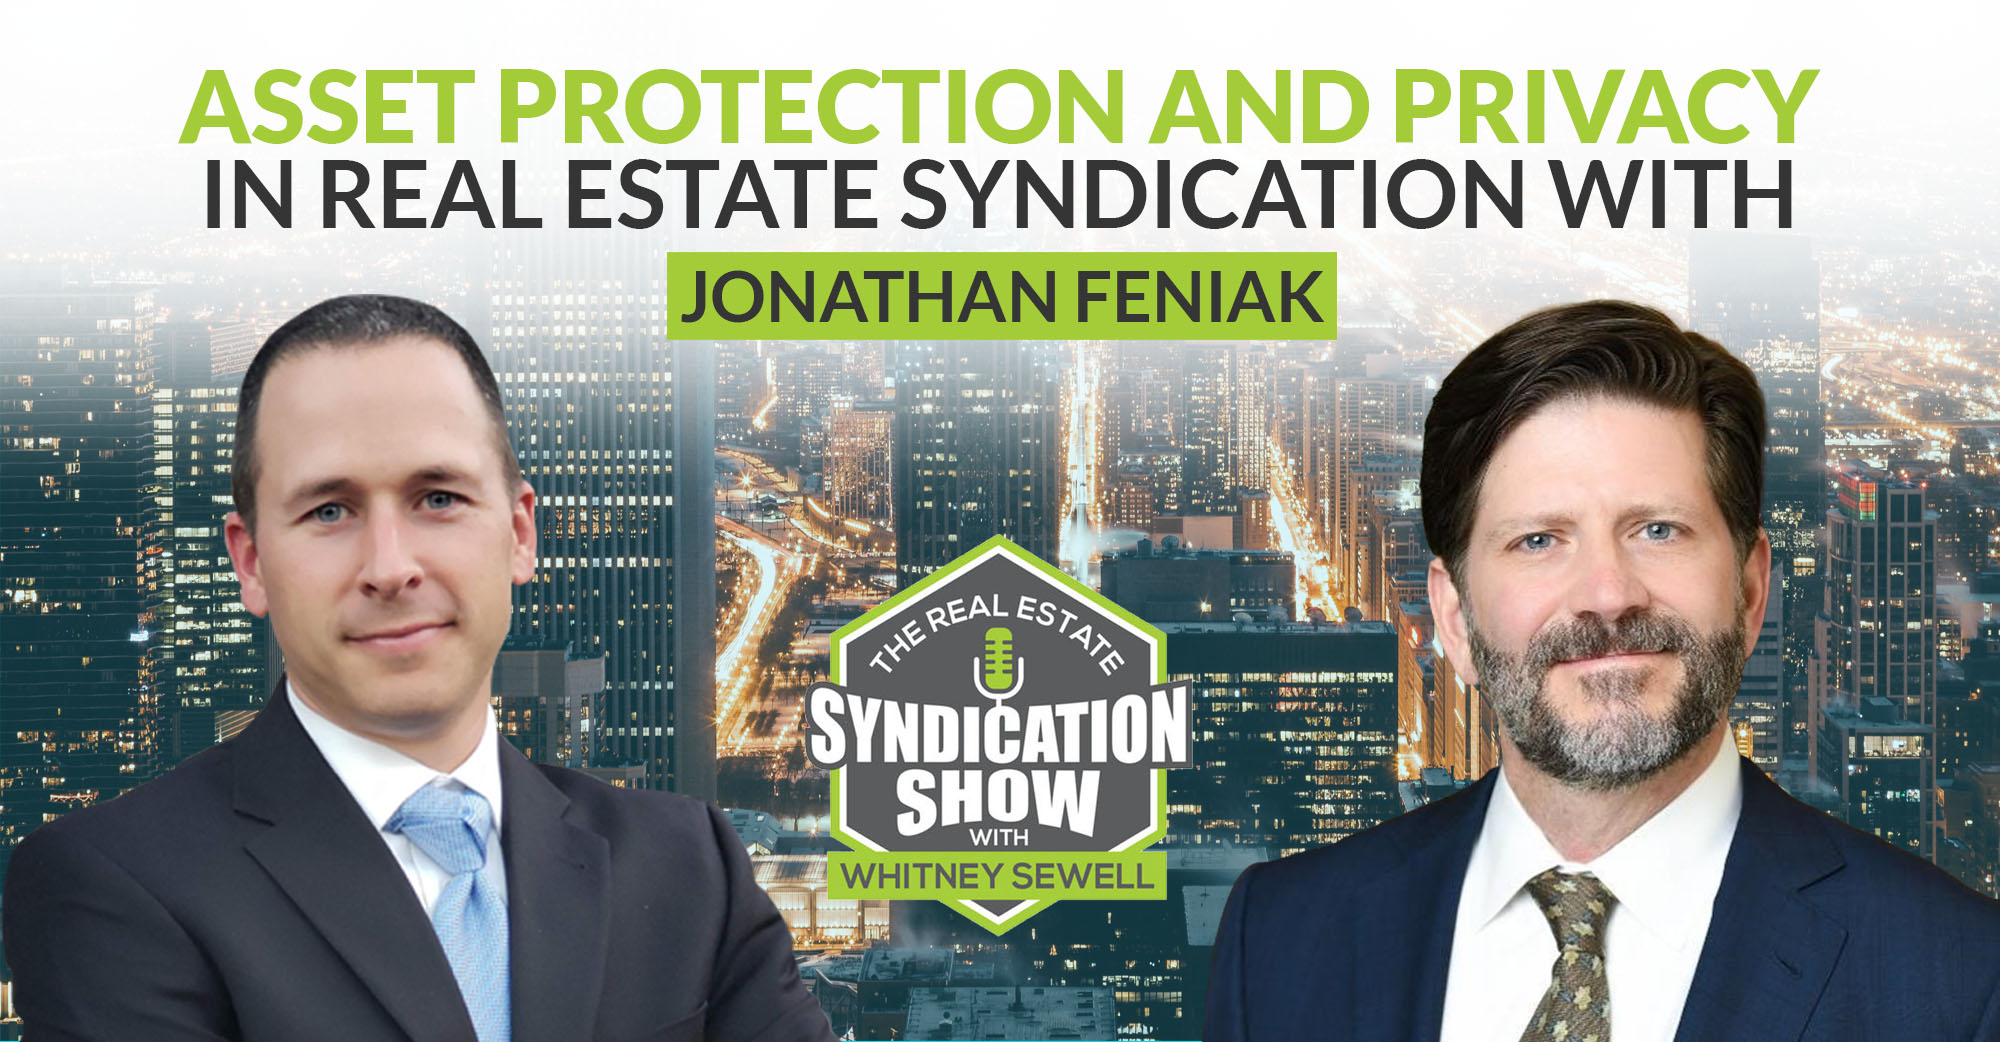 Asset Protection and Privacy in Real Estate Syndication With Jonathan Feniak